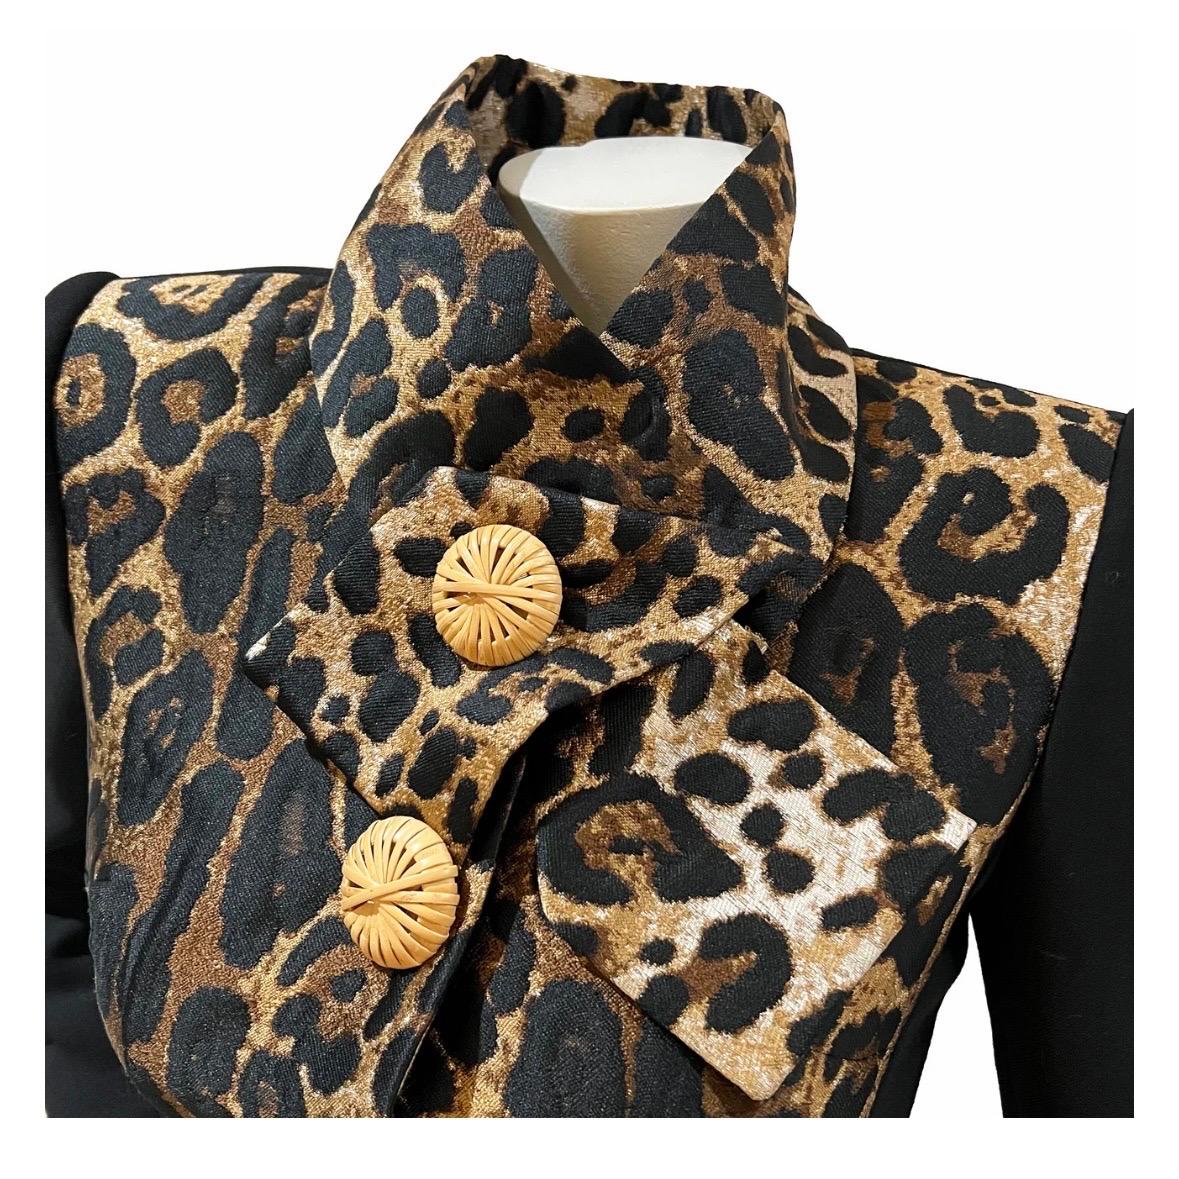 Leopard jacket by Dolce & Gabbana 
Spring 2020 Ready-to-Wear
Made in Italy
Leopard print bodice
Black sleeves
Decorative oversized rattan buttons down front
Front snap closure 
Triple rattan cuff button detail 
Asymmetrical collar   
Padded